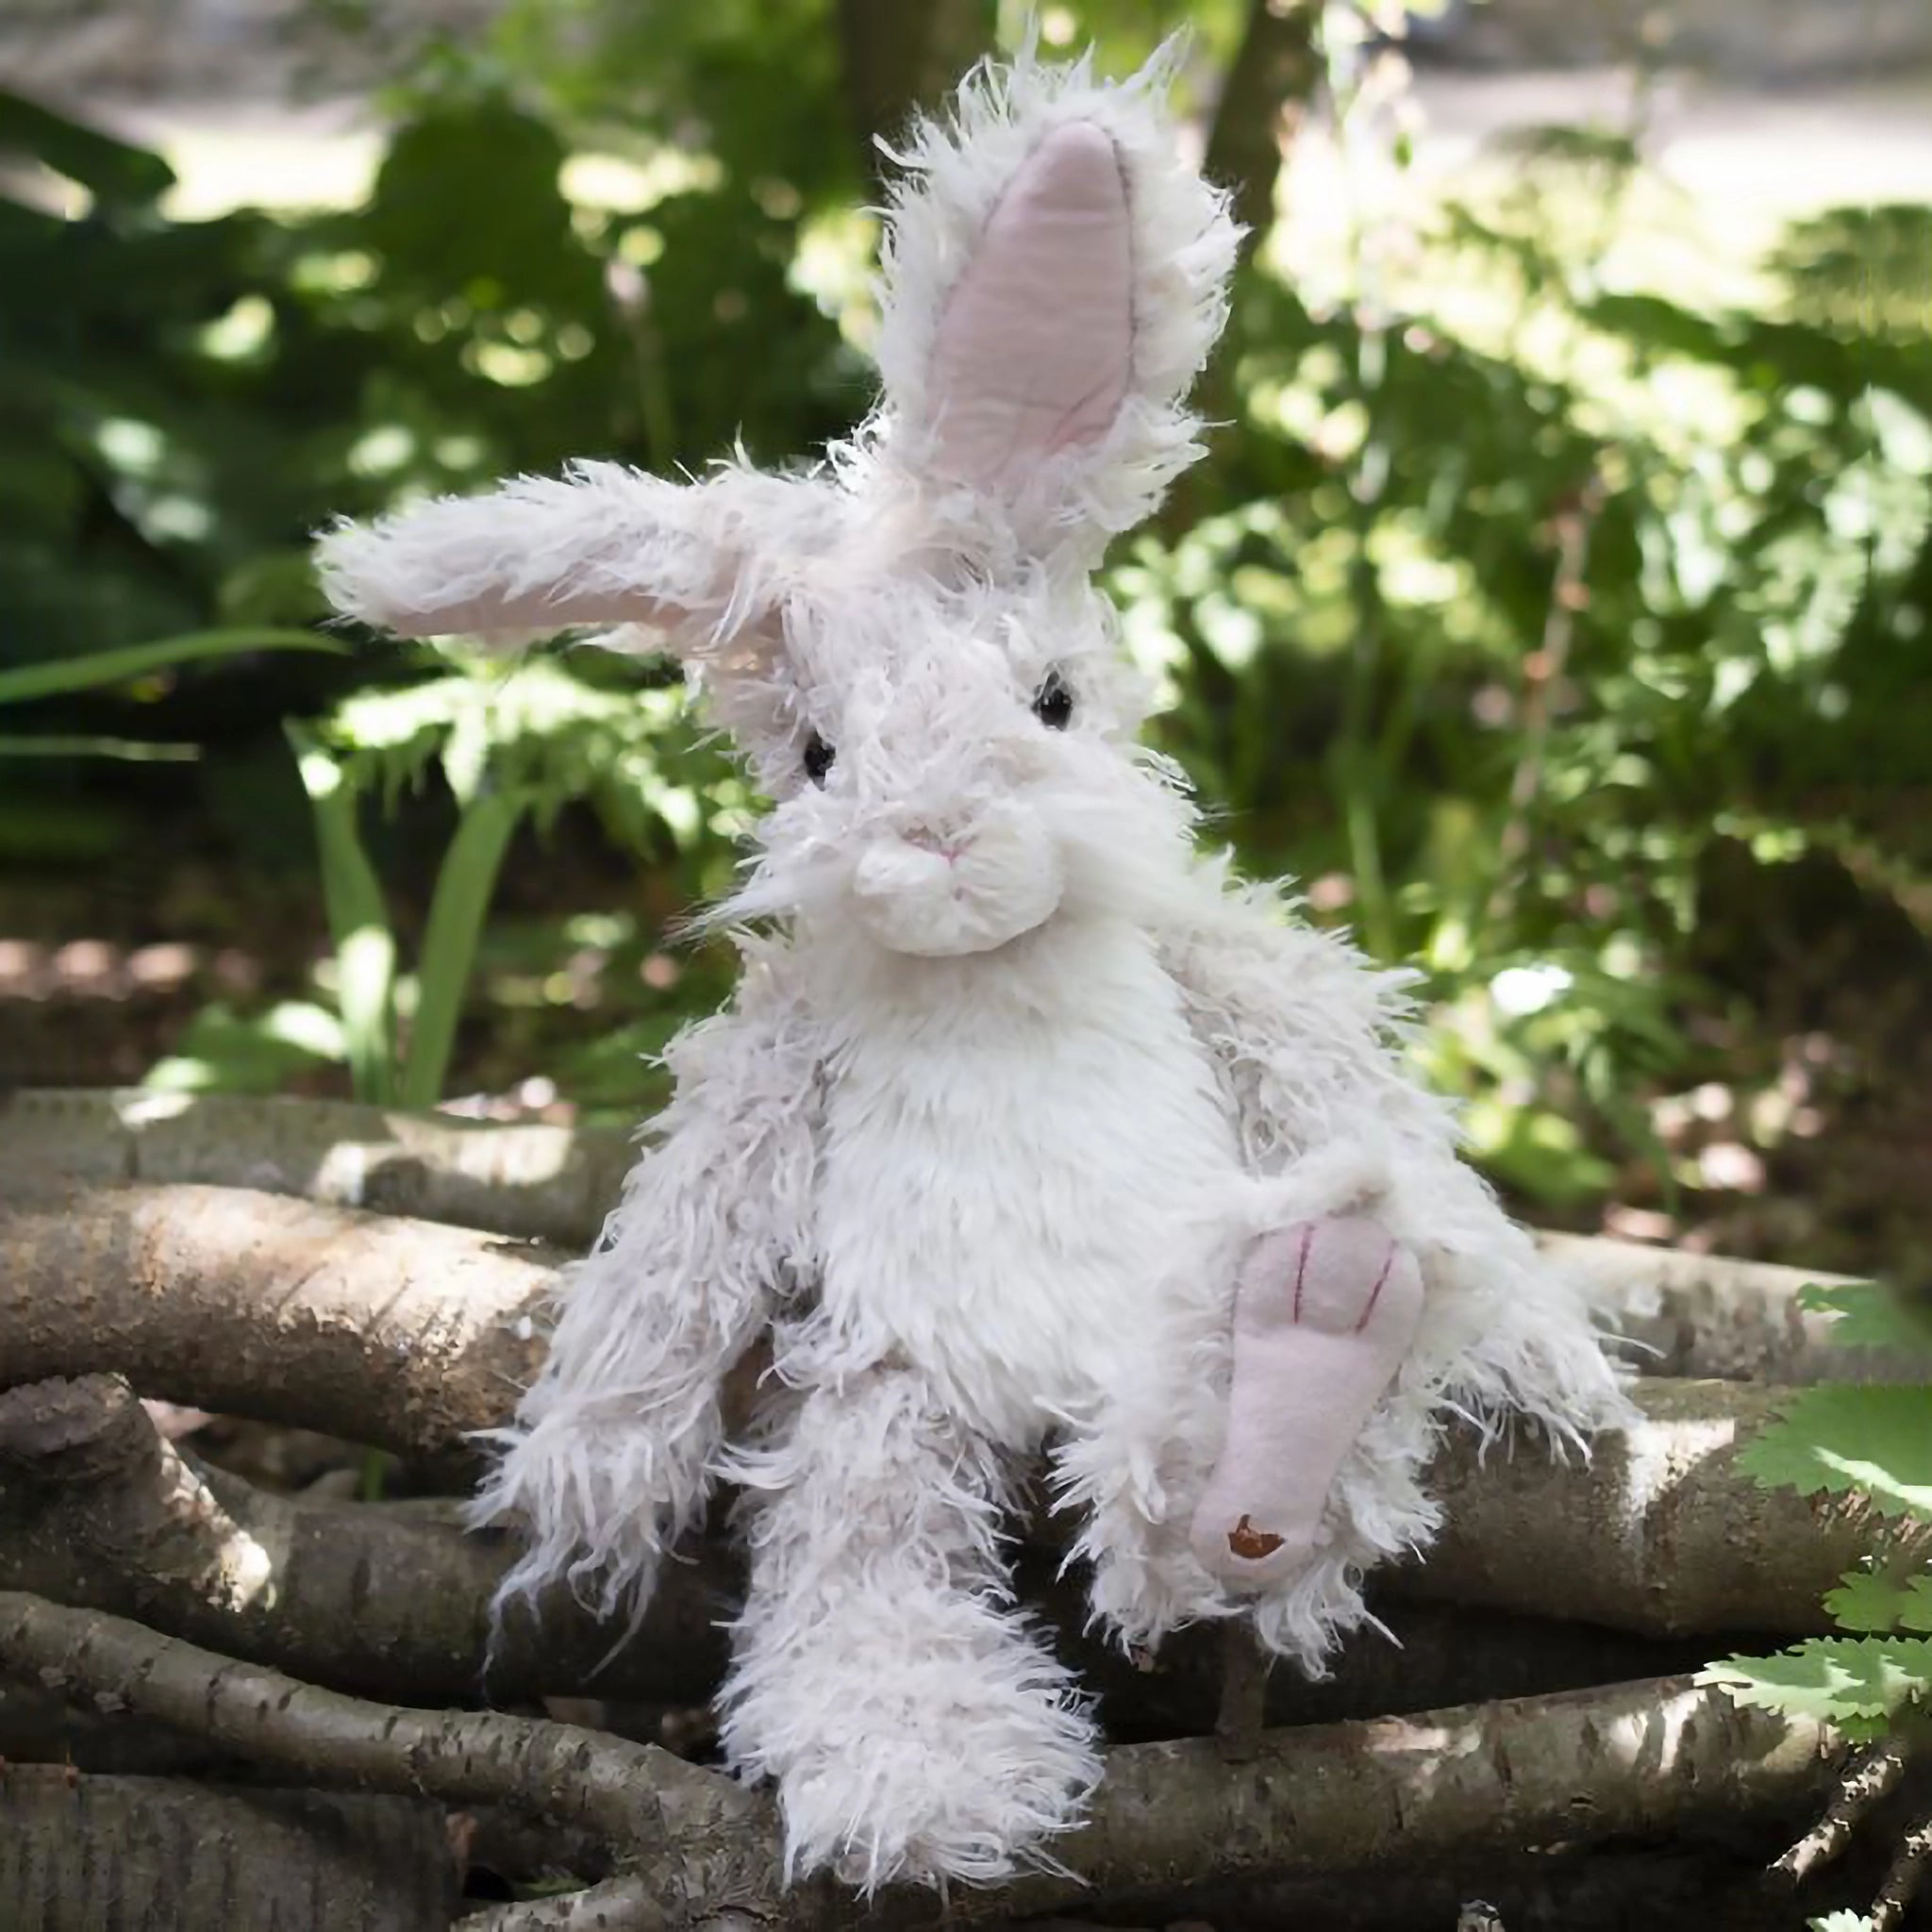 A stuffed hare plush toy with the Wrendale logo embroidered on the bottom of its foot posed on branches